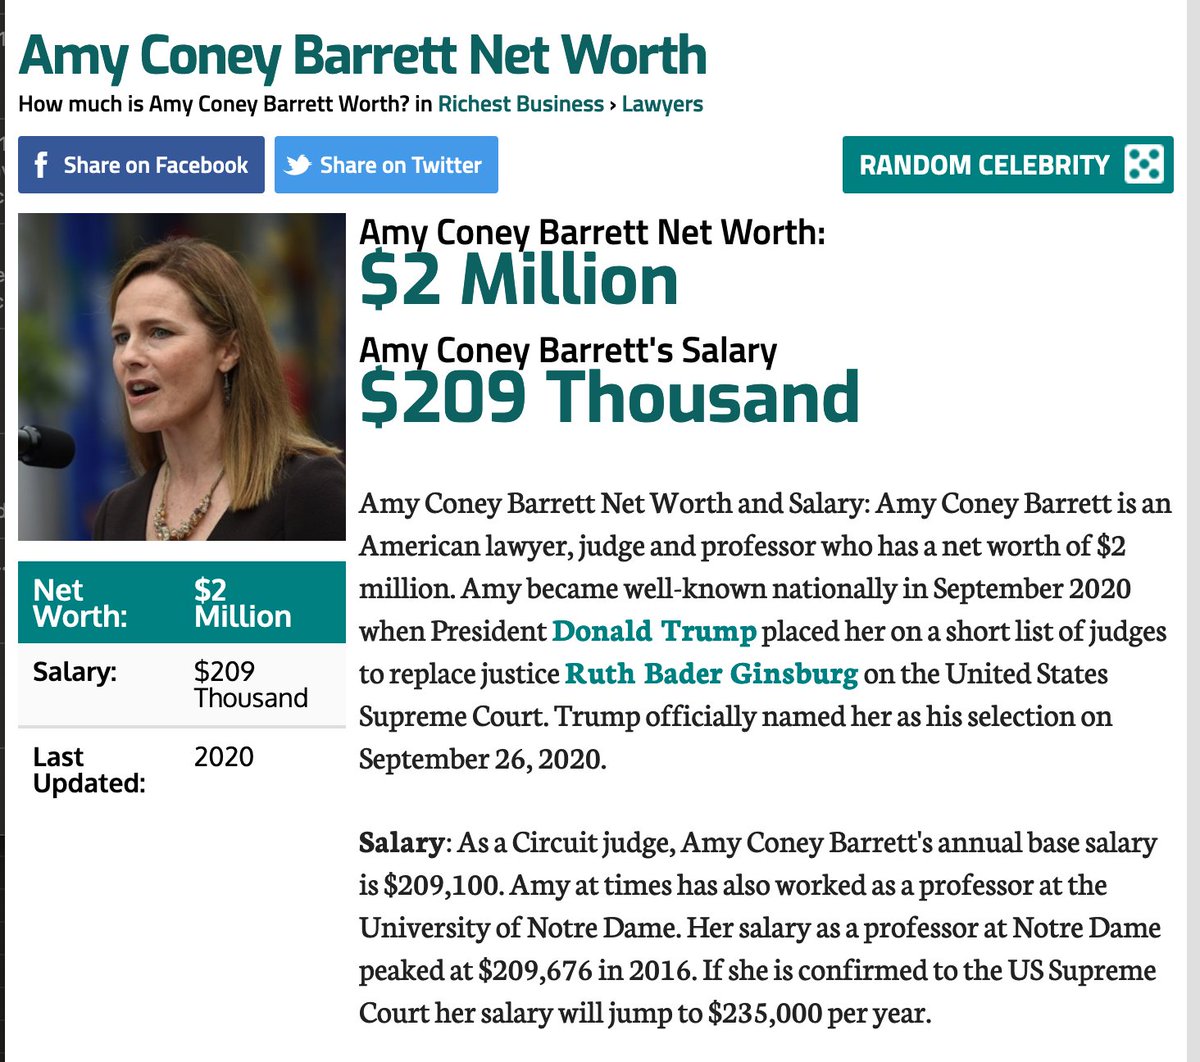 26/ Amy Coney Barrett's networth is over $2 million. But not "elite", right? https://www.celebritynetworth.com/richest-businessmen/lawyers/amy-coney-barrett-net-worth/Archive  https://web.archive.org/web/20201003195026/https://www.celebritynetworth.com/richest-businessmen/lawyers/amy-coney-barrett-net-worth/